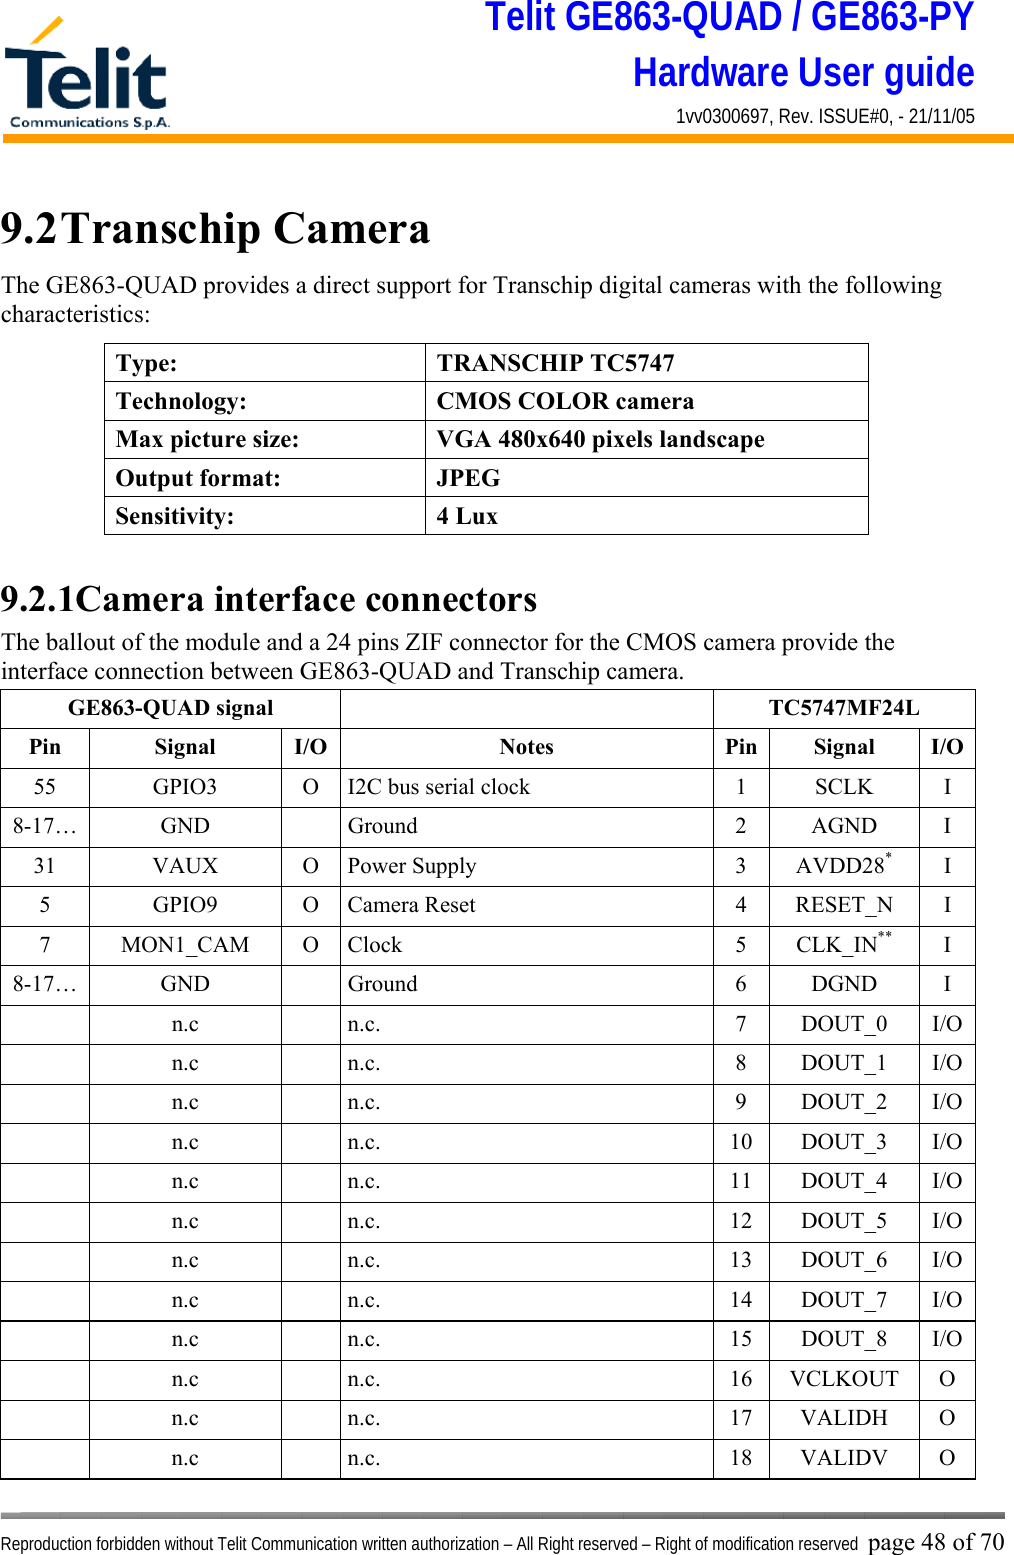 Telit GE863-QUAD / GE863-PY Hardware User guide 1vv0300697, Rev. ISSUE#0, - 21/11/05    Reproduction forbidden without Telit Communication written authorization – All Right reserved – Right of modification reserved page 48 of 70 9.2 Transchip  Camera   The GE863-QUAD provides a direct support for Transchip digital cameras with the following characteristics:  9.2.1Camera interface connectors The ballout of the module and a 24 pins ZIF connector for the CMOS camera provide the interface connection between GE863-QUAD and Transchip camera. GE863-QUAD signal    TC5747MF24L Pin Signal I/O  Notes  Pin Signal I/O55  GPIO3  O  I2C bus serial clock  1  SCLK  I 8-17… GND   Ground  2 AGND I 31 VAUX O Power Supply  3 AVDD28* I 5 GPIO9 O Camera Reset  4 RESET_N I 7 MON1_CAM O Clock  5 CLK_IN** I 8-17… GND   Ground  6 DGND I  n.c  n.c.  7 DOUT_0 I/O  n.c  n.c.  8 DOUT_1  I/O  n.c  n.c.  9 DOUT_2 I/O  n.c  n.c.  10 DOUT_3 I/O  n.c  n.c.  11 DOUT_4 I/O  n.c  n.c.  12 DOUT_5 I/O  n.c  n.c.  13 DOUT_6 I/O  n.c  n.c.  14 DOUT_7 I/O  n.c  n.c.  15 DOUT_8 I/O  n.c  n.c.  16 VCLKOUT O  n.c  n.c.  17 VALIDH O  n.c  n.c.  18 VALIDV O Type: TRANSCHIP TC5747 Technology:  CMOS COLOR camera Max picture size:  VGA 480x640 pixels landscape Output format:  JPEG Sensitivity: 4 Lux 